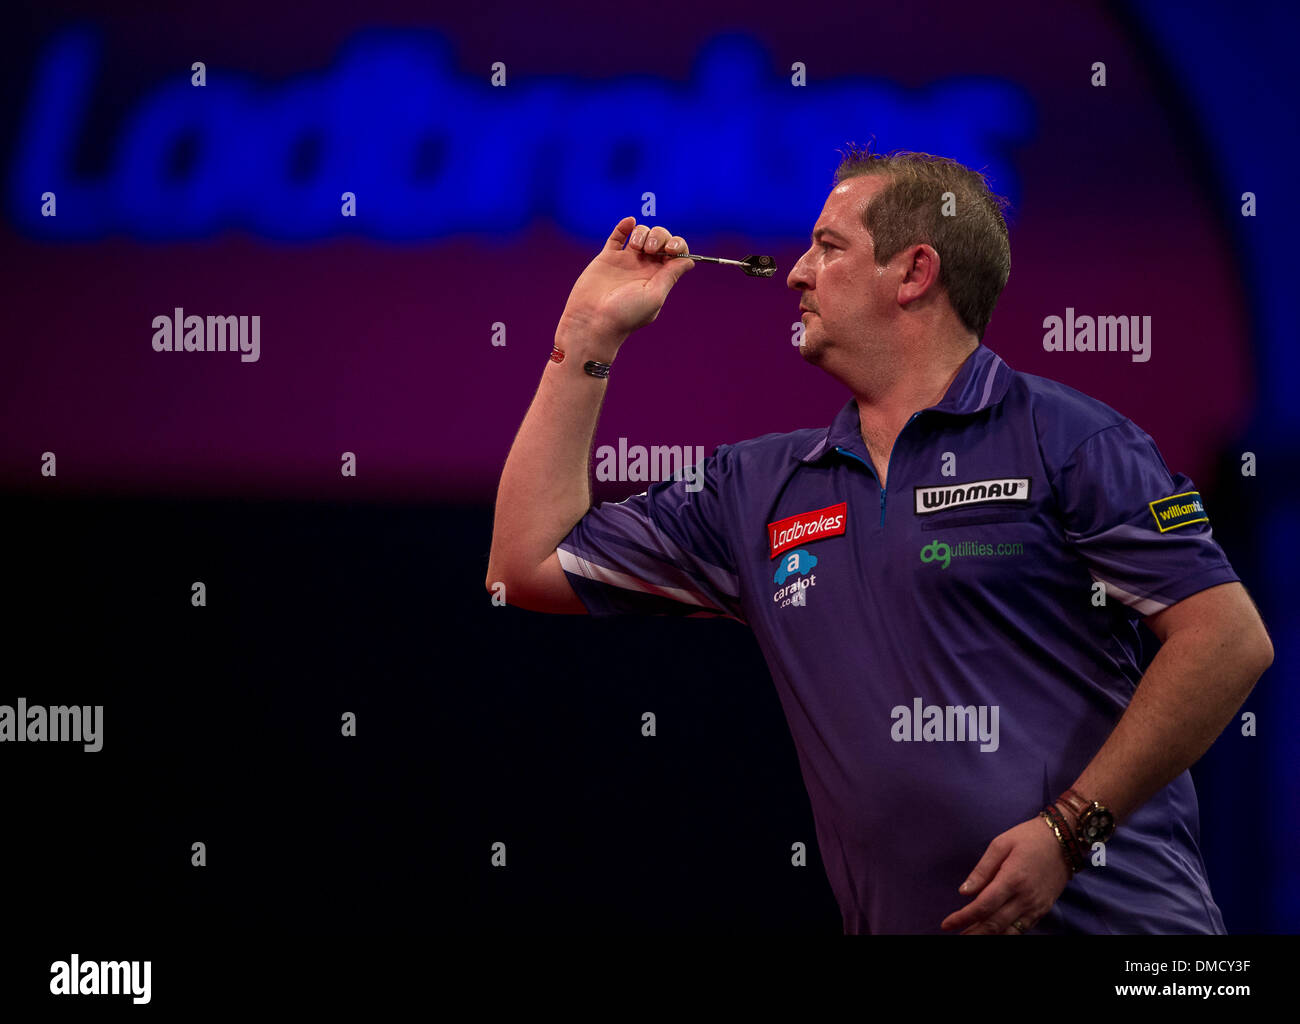 London, UK. 13th Dec, 2013. Dean Winstanley (England) in action against Richie Burnett (Wales) [28] during the Ladbrokes World Darts Championships from Alexandra Palace. Credit:  Action Plus Sports/Alamy Live News Stock Photo